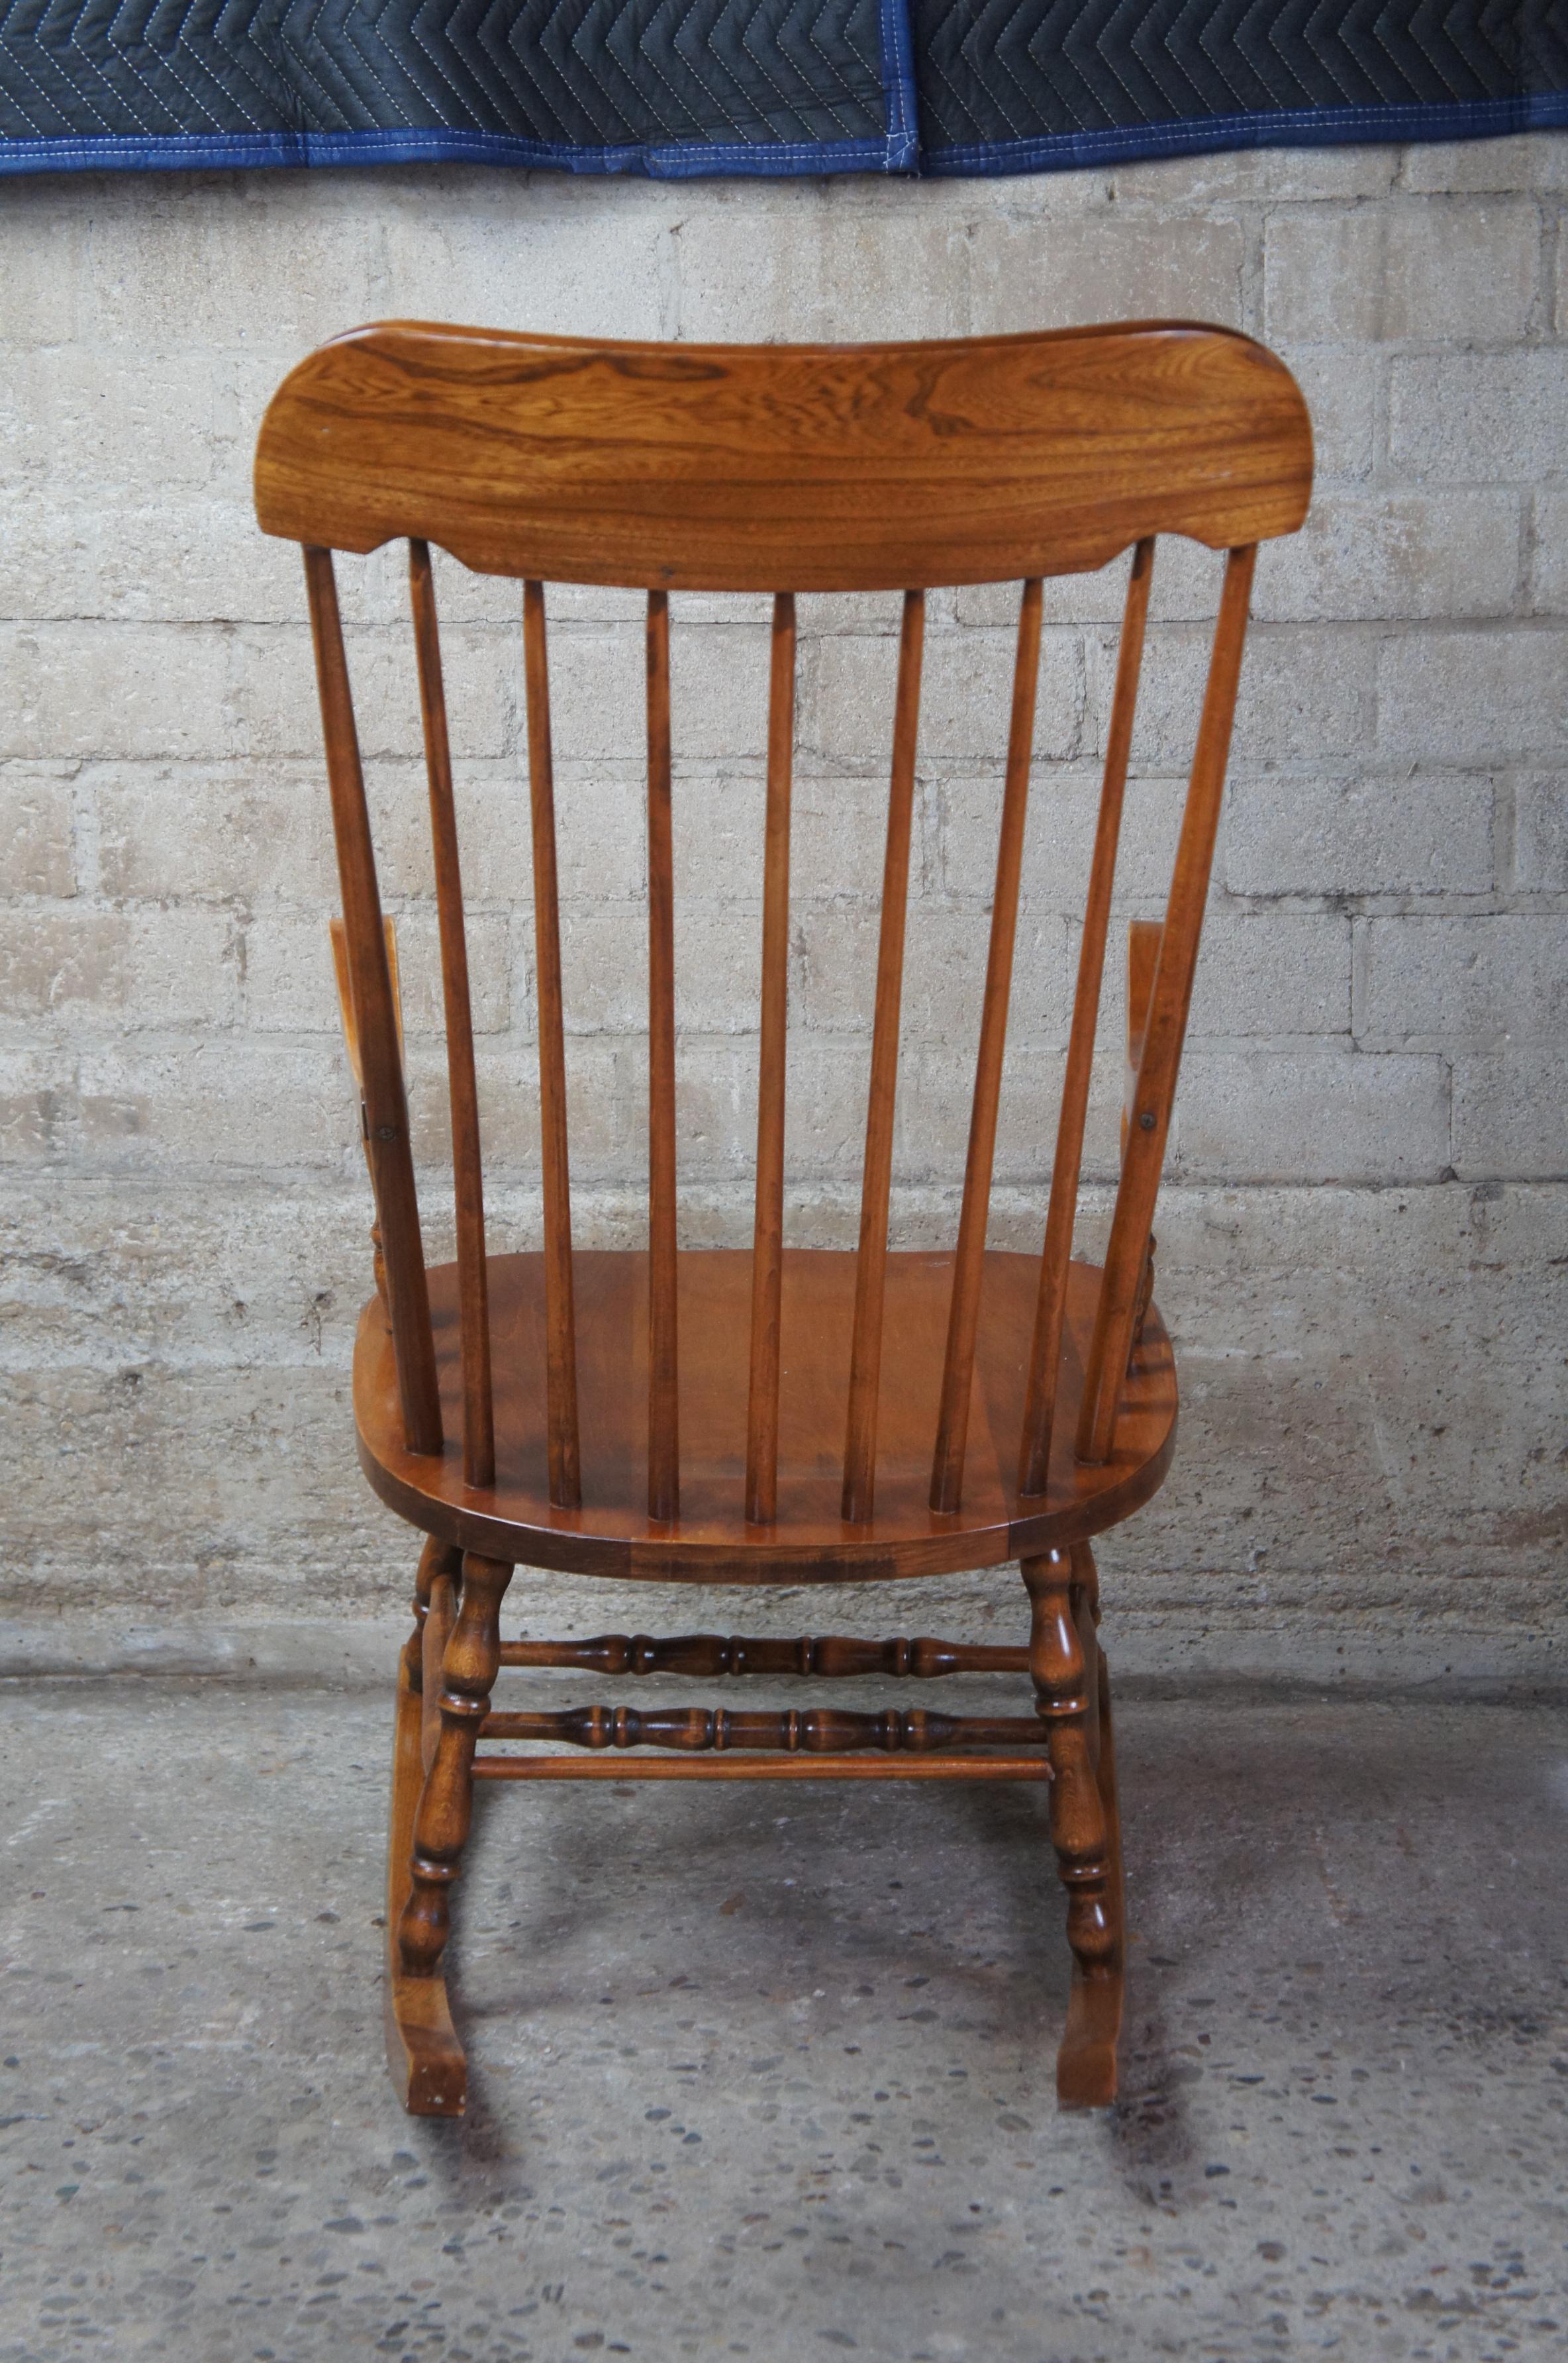 20th Century Early American Country Maple Spindle Rocking Chair Farmhouse Rocker Windsor